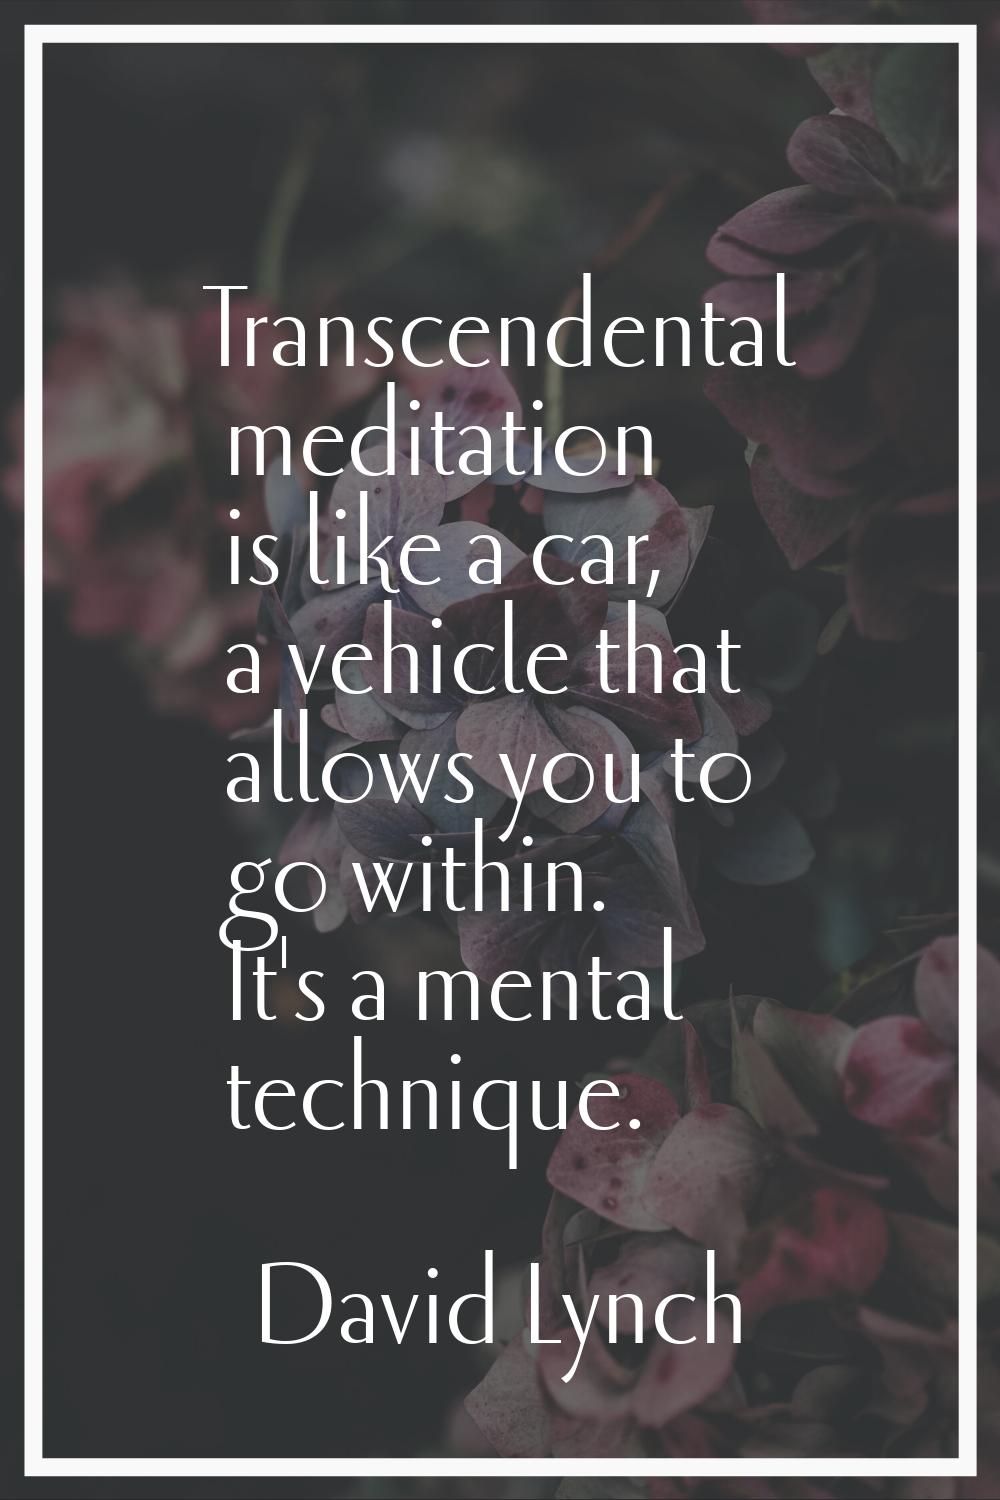 Transcendental meditation is like a car, a vehicle that allows you to go within. It's a mental tech